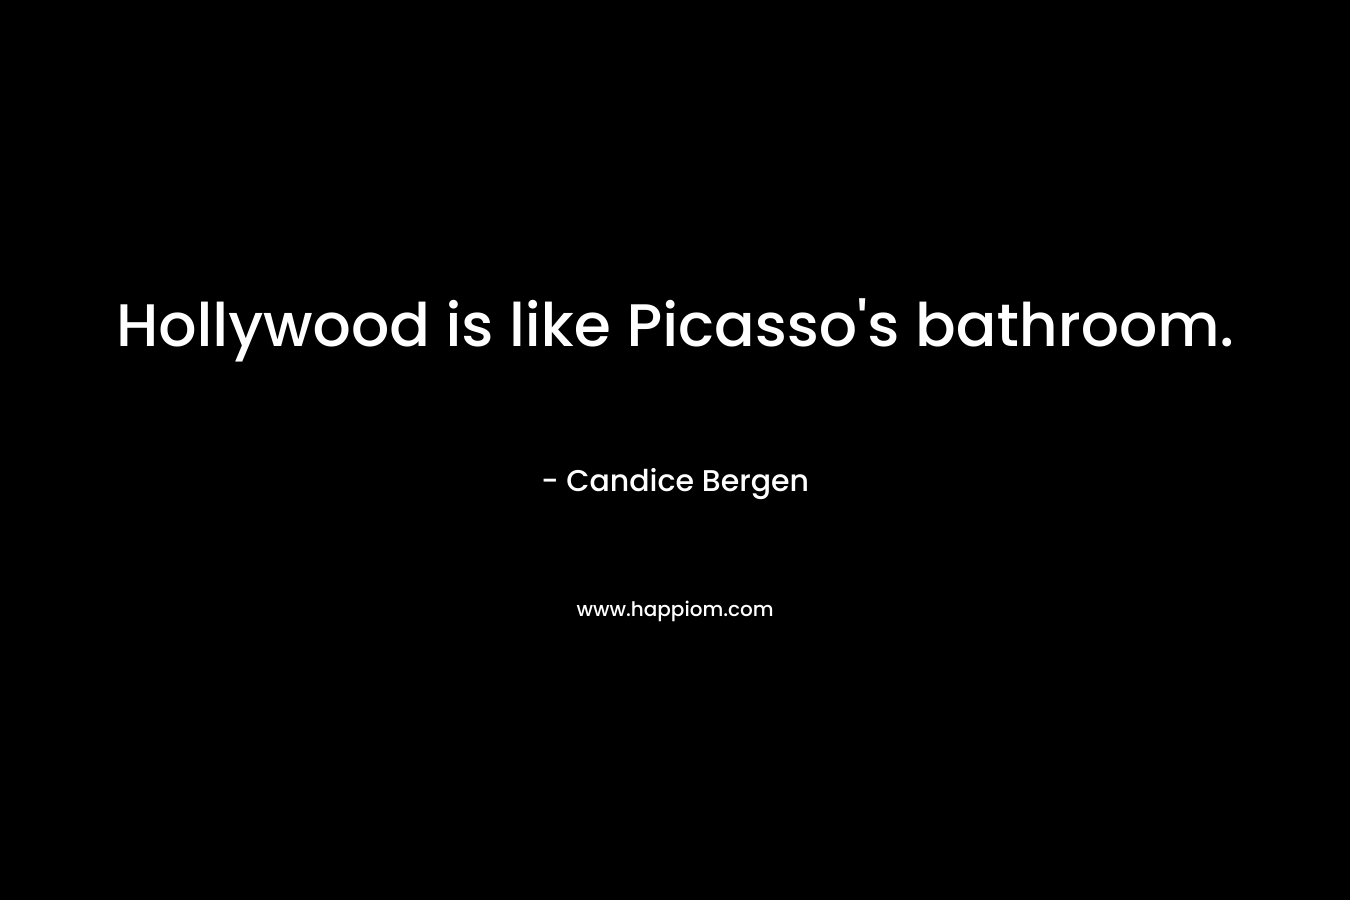 Hollywood is like Picasso's bathroom.